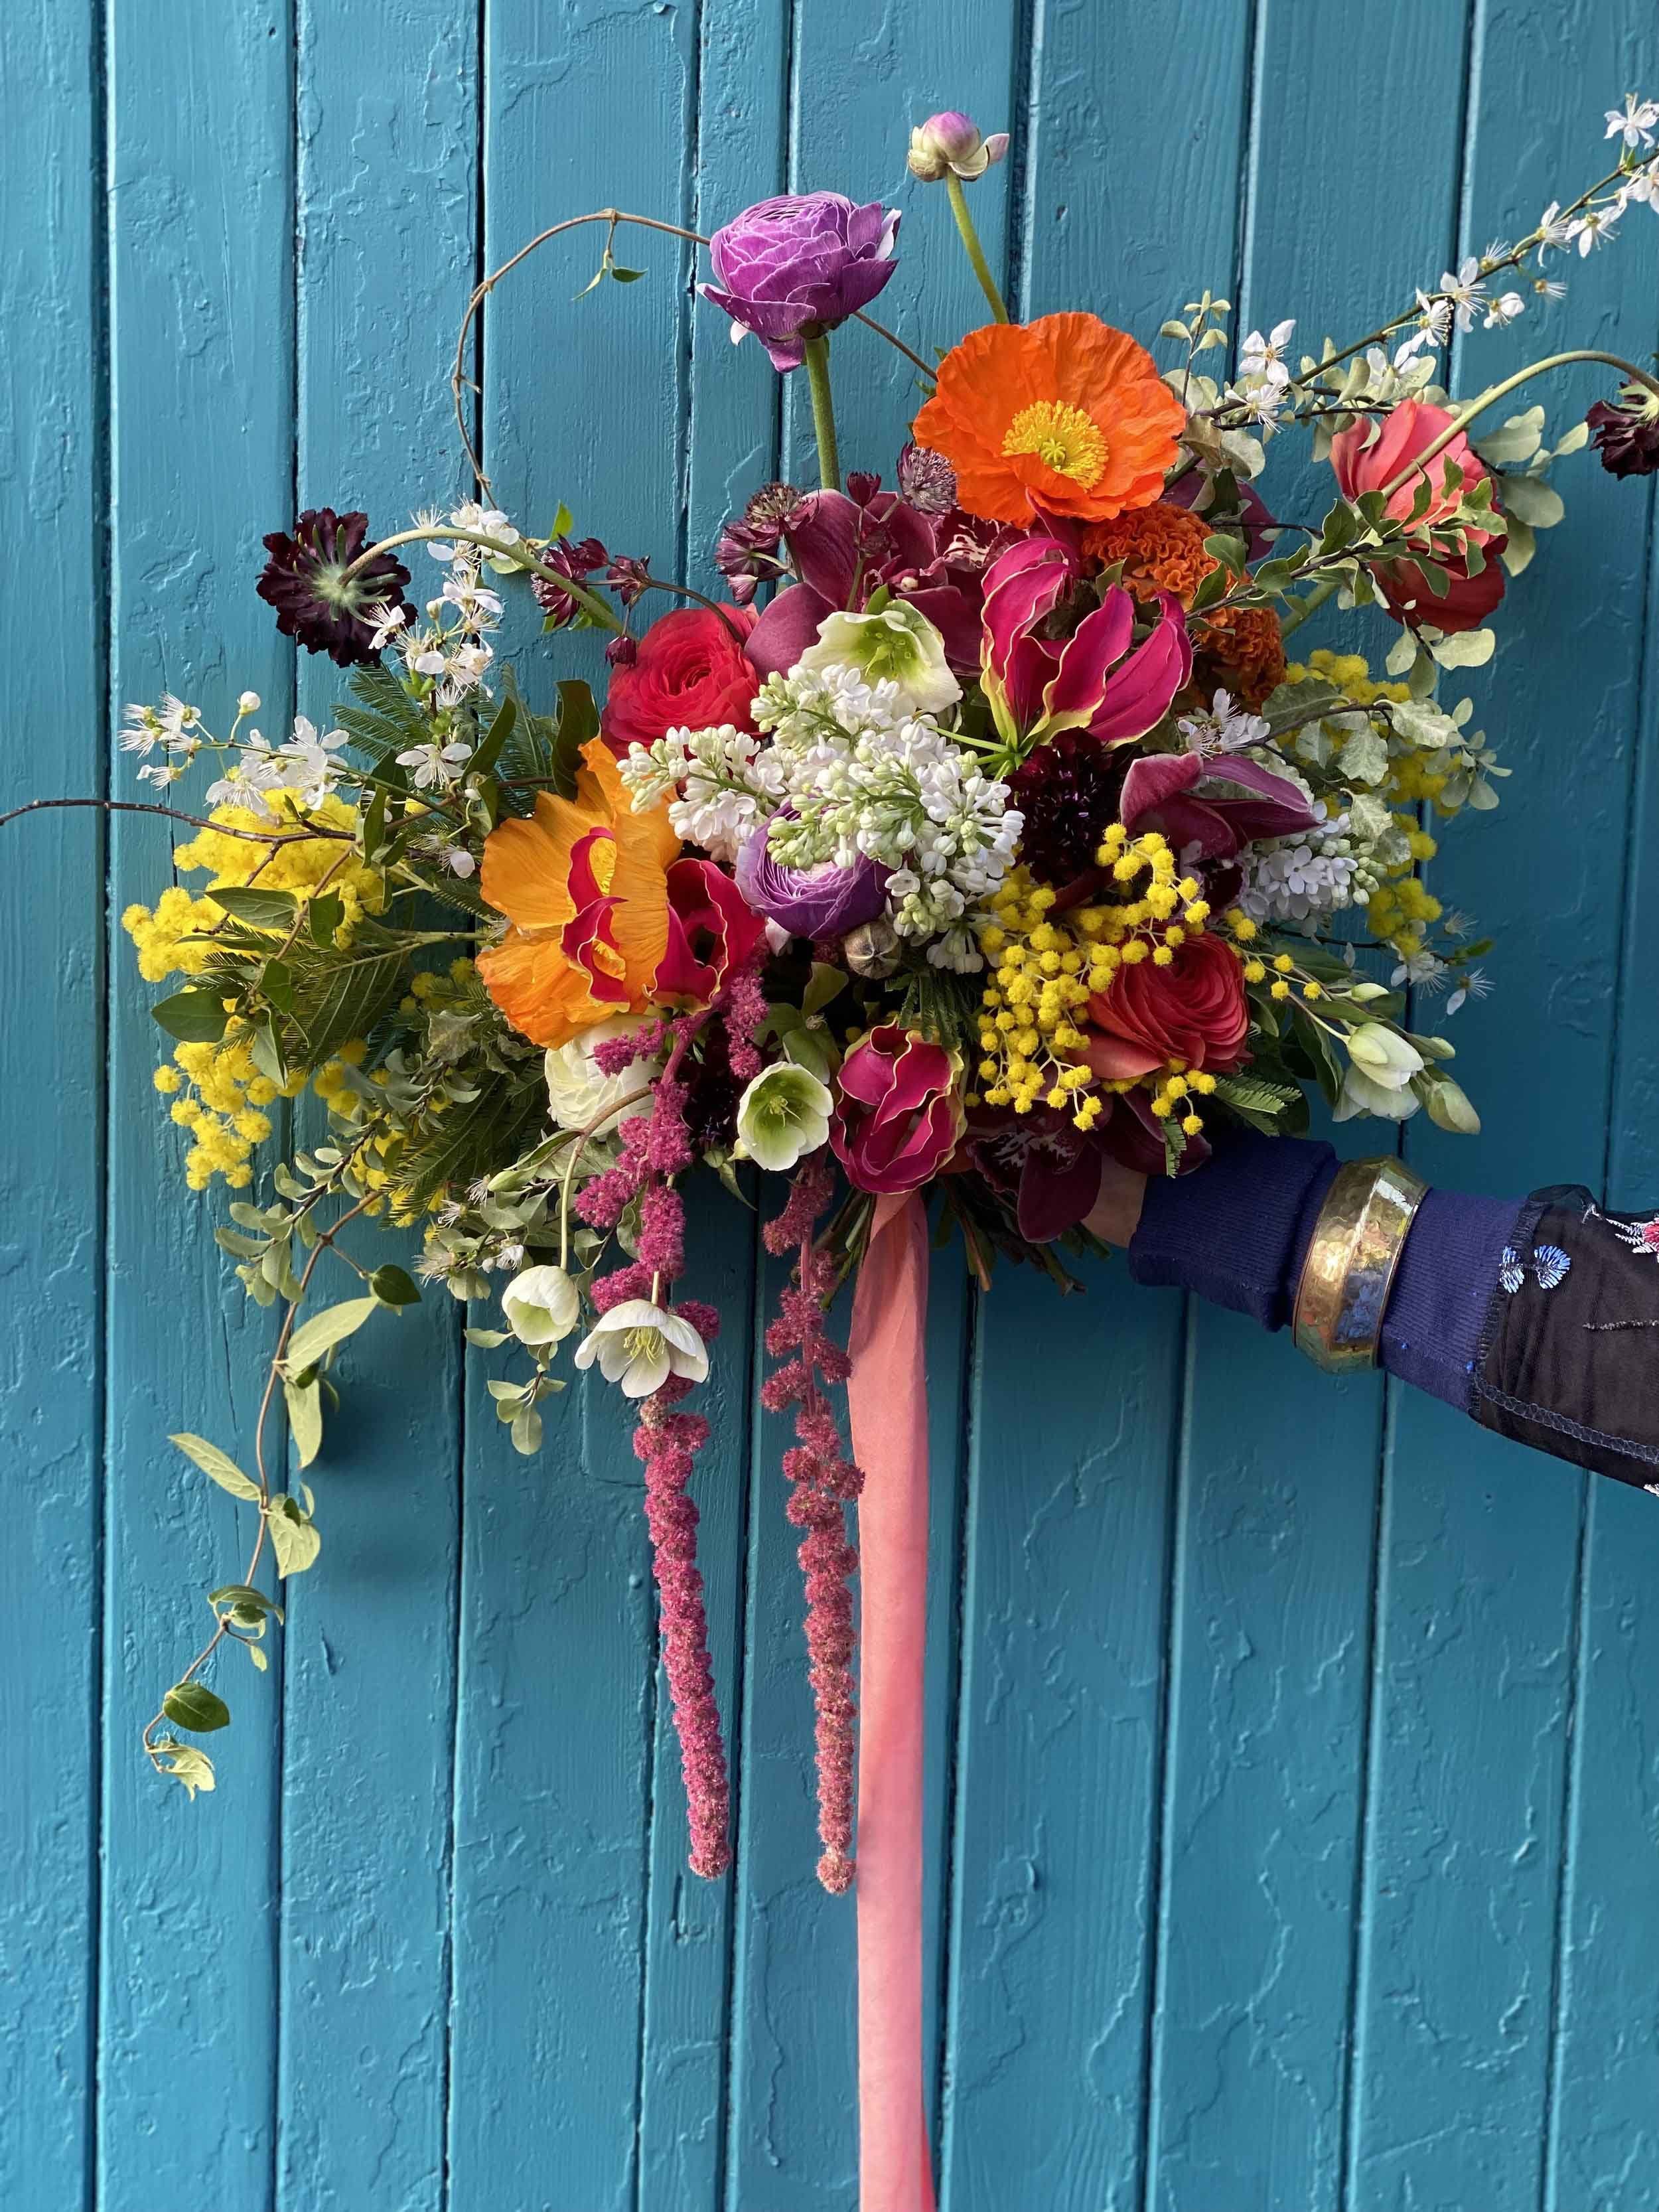 Brightly coloured bridal bouquet showcased against a blue wooden background